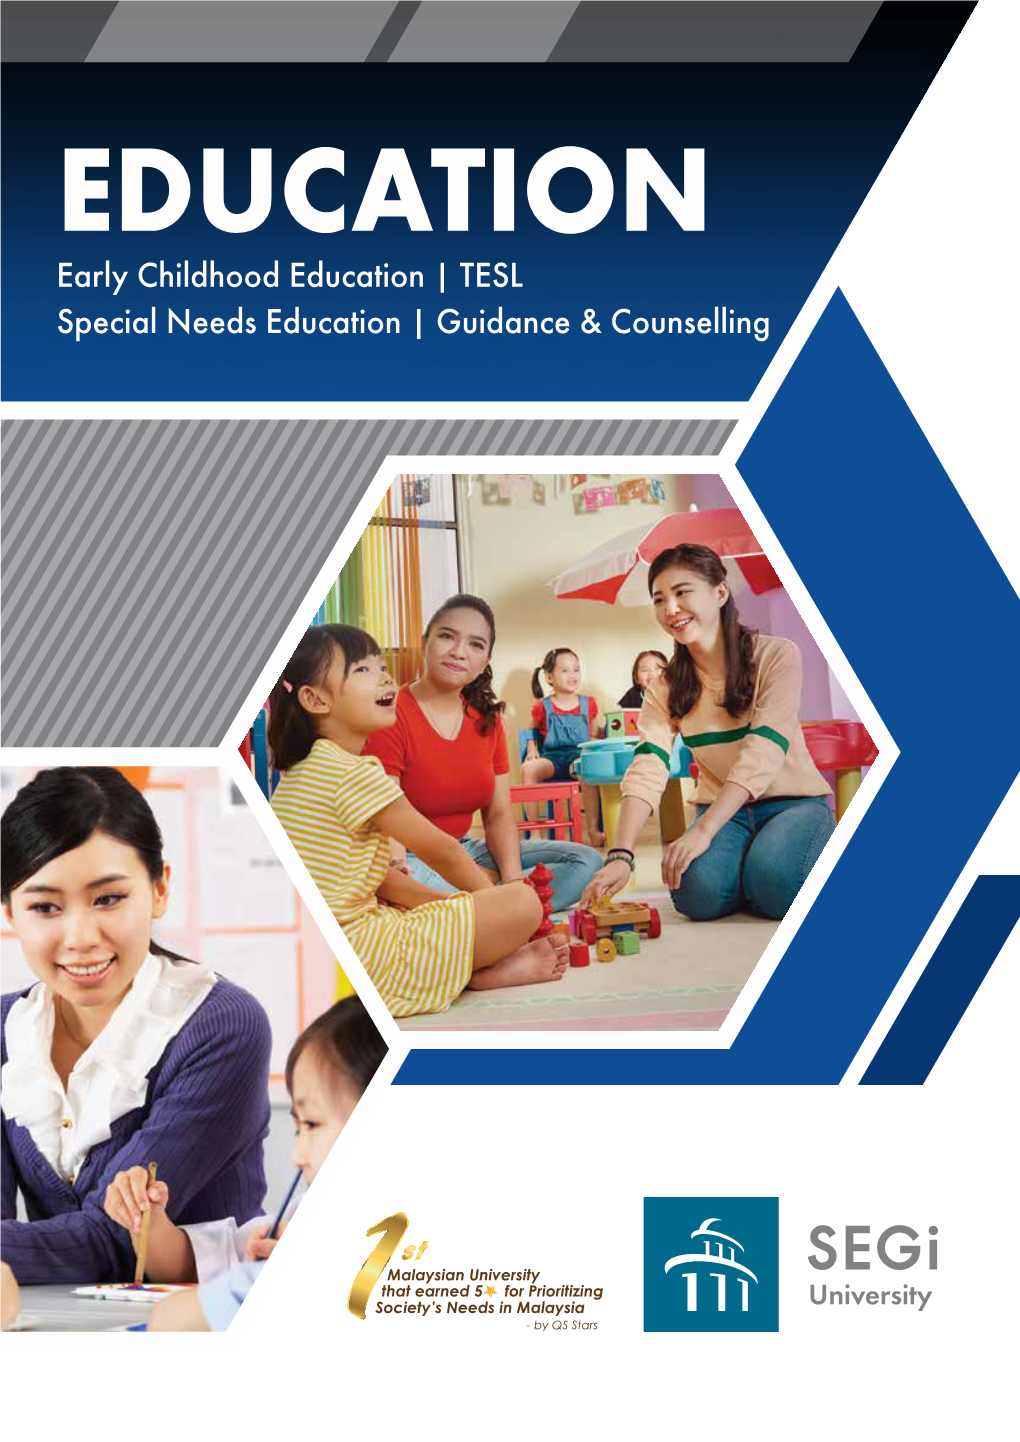 TESL Special Needs Education | Guidance & Counselling